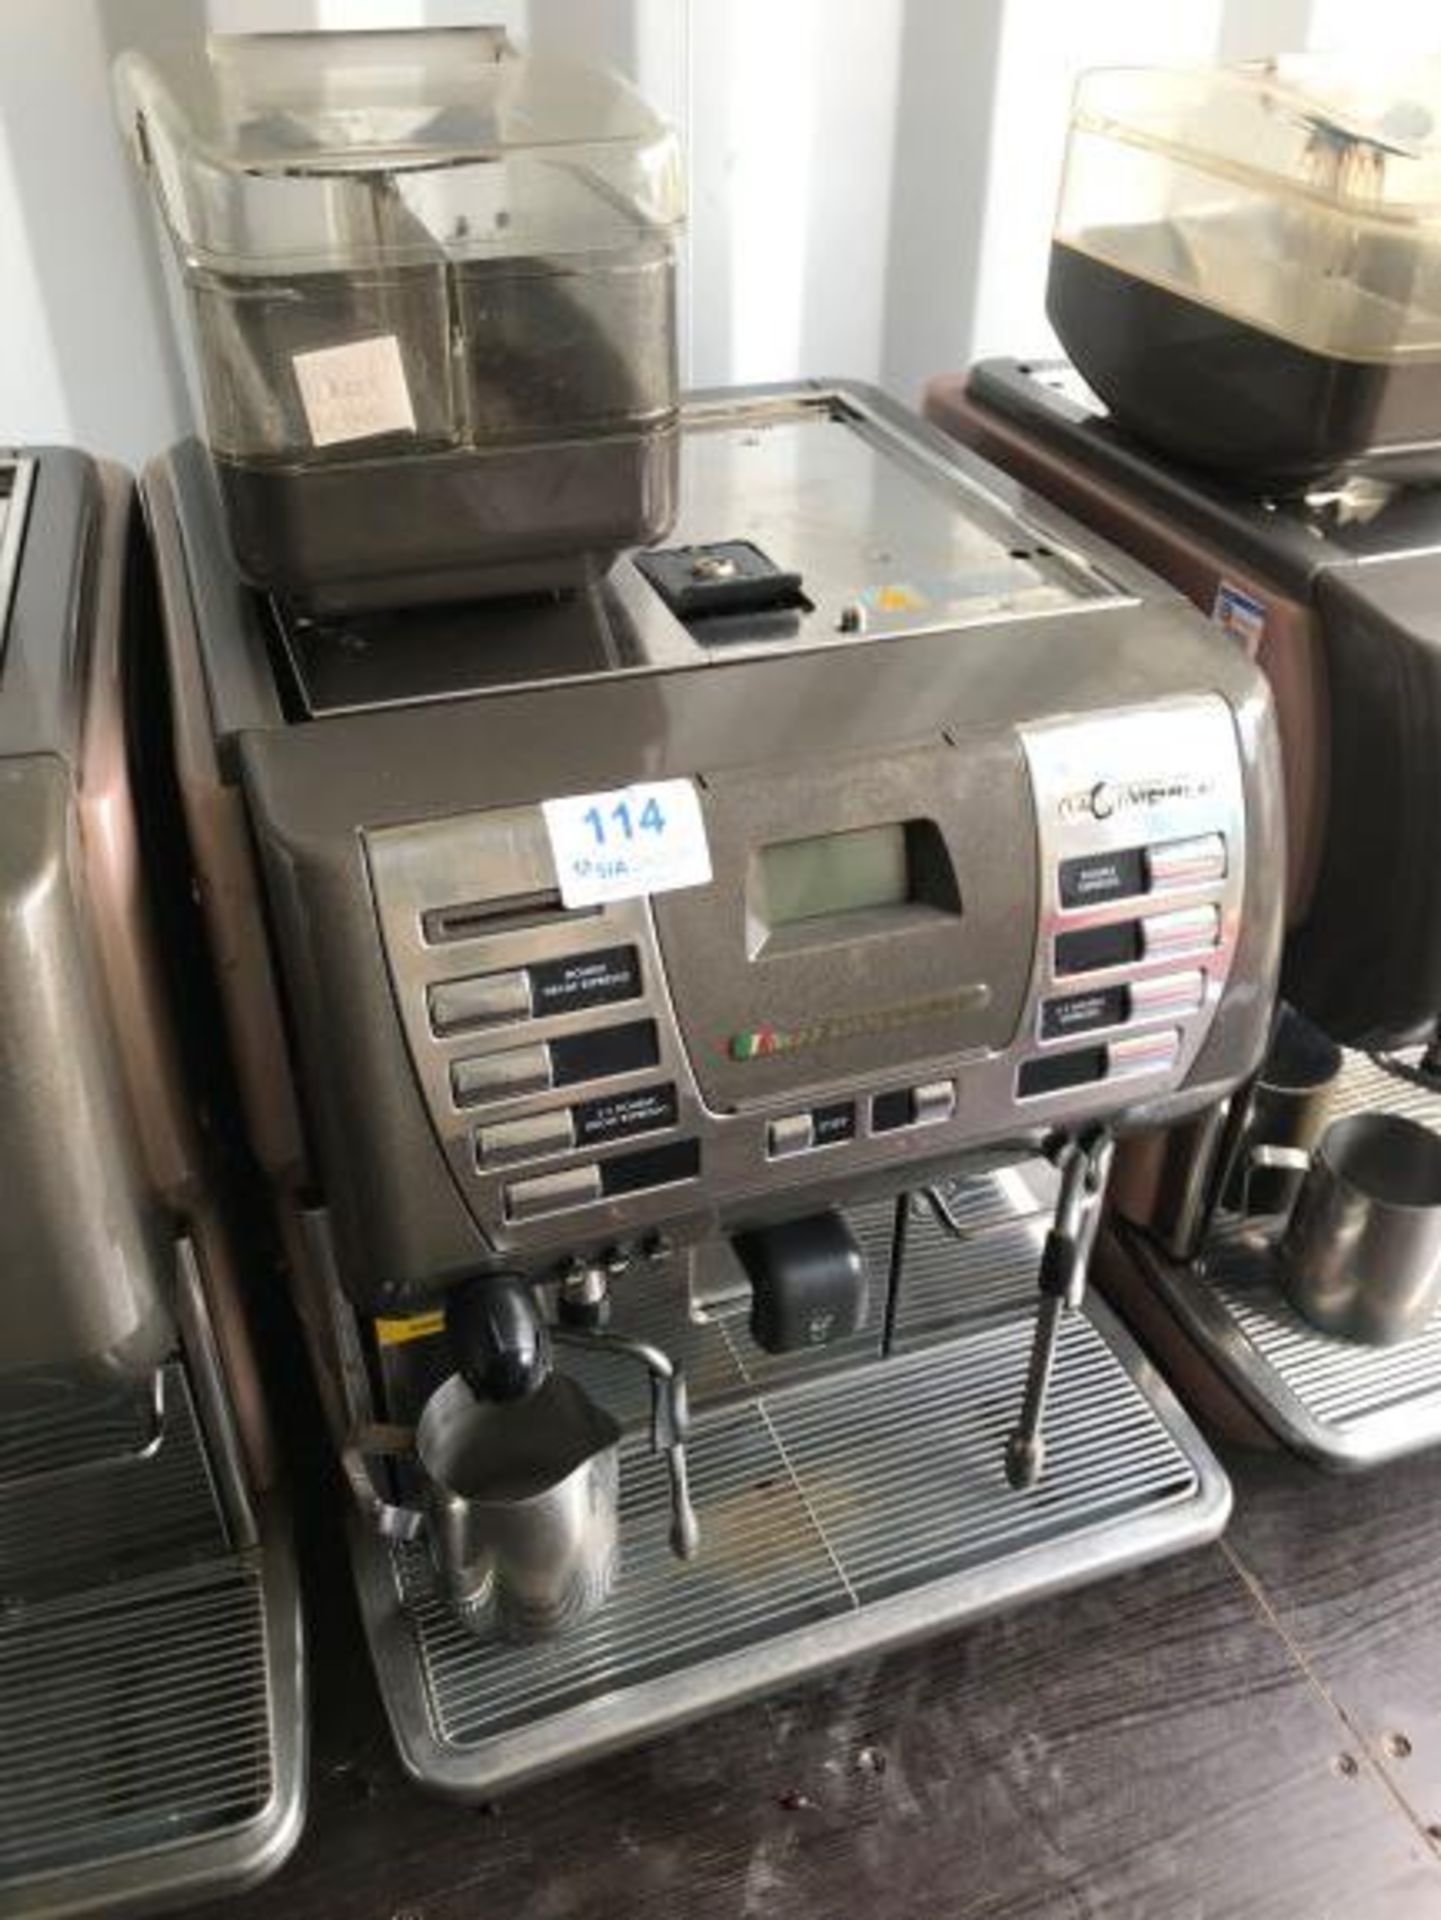 La Cimbali M53 Dolcevita Automatic Commercial Coffee Machine - Image 2 of 4